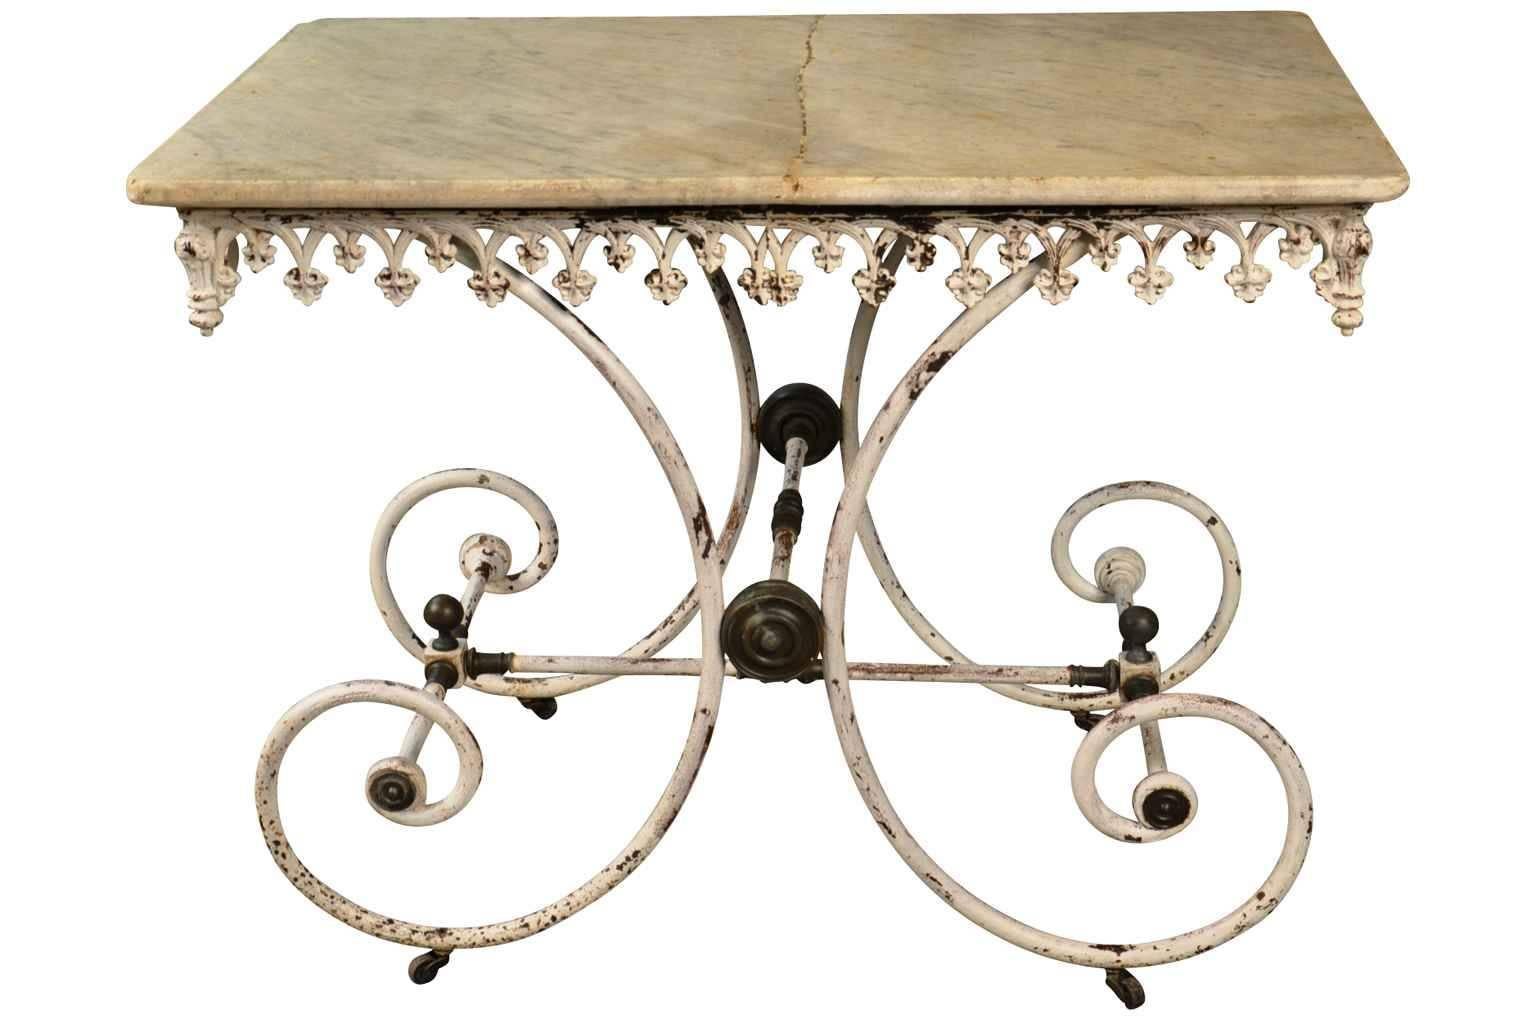 A wonderful 19th century French butcher table from the South of France. Handsomely constructed with a cast iron base and marble top. The table retains its original casters.